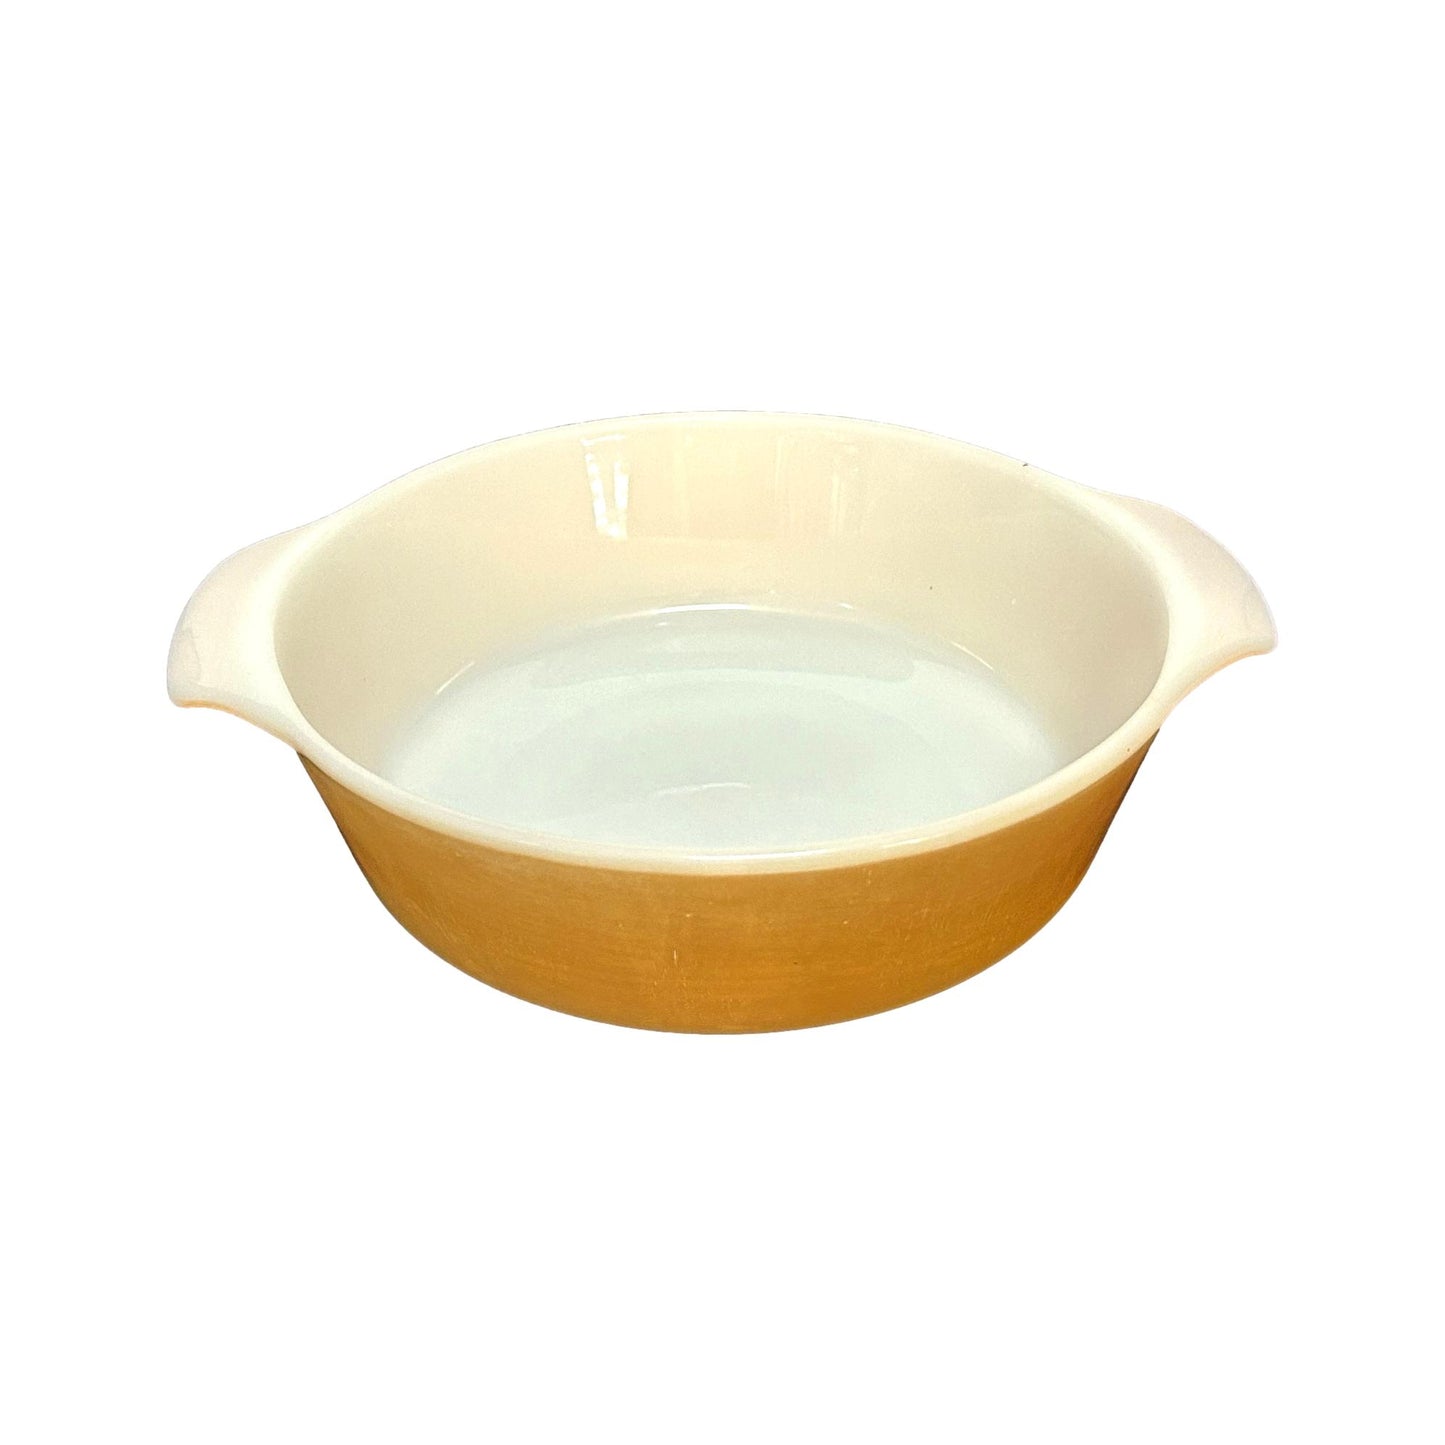 Fire King Iridescent Peach Luster Baking Ovenware